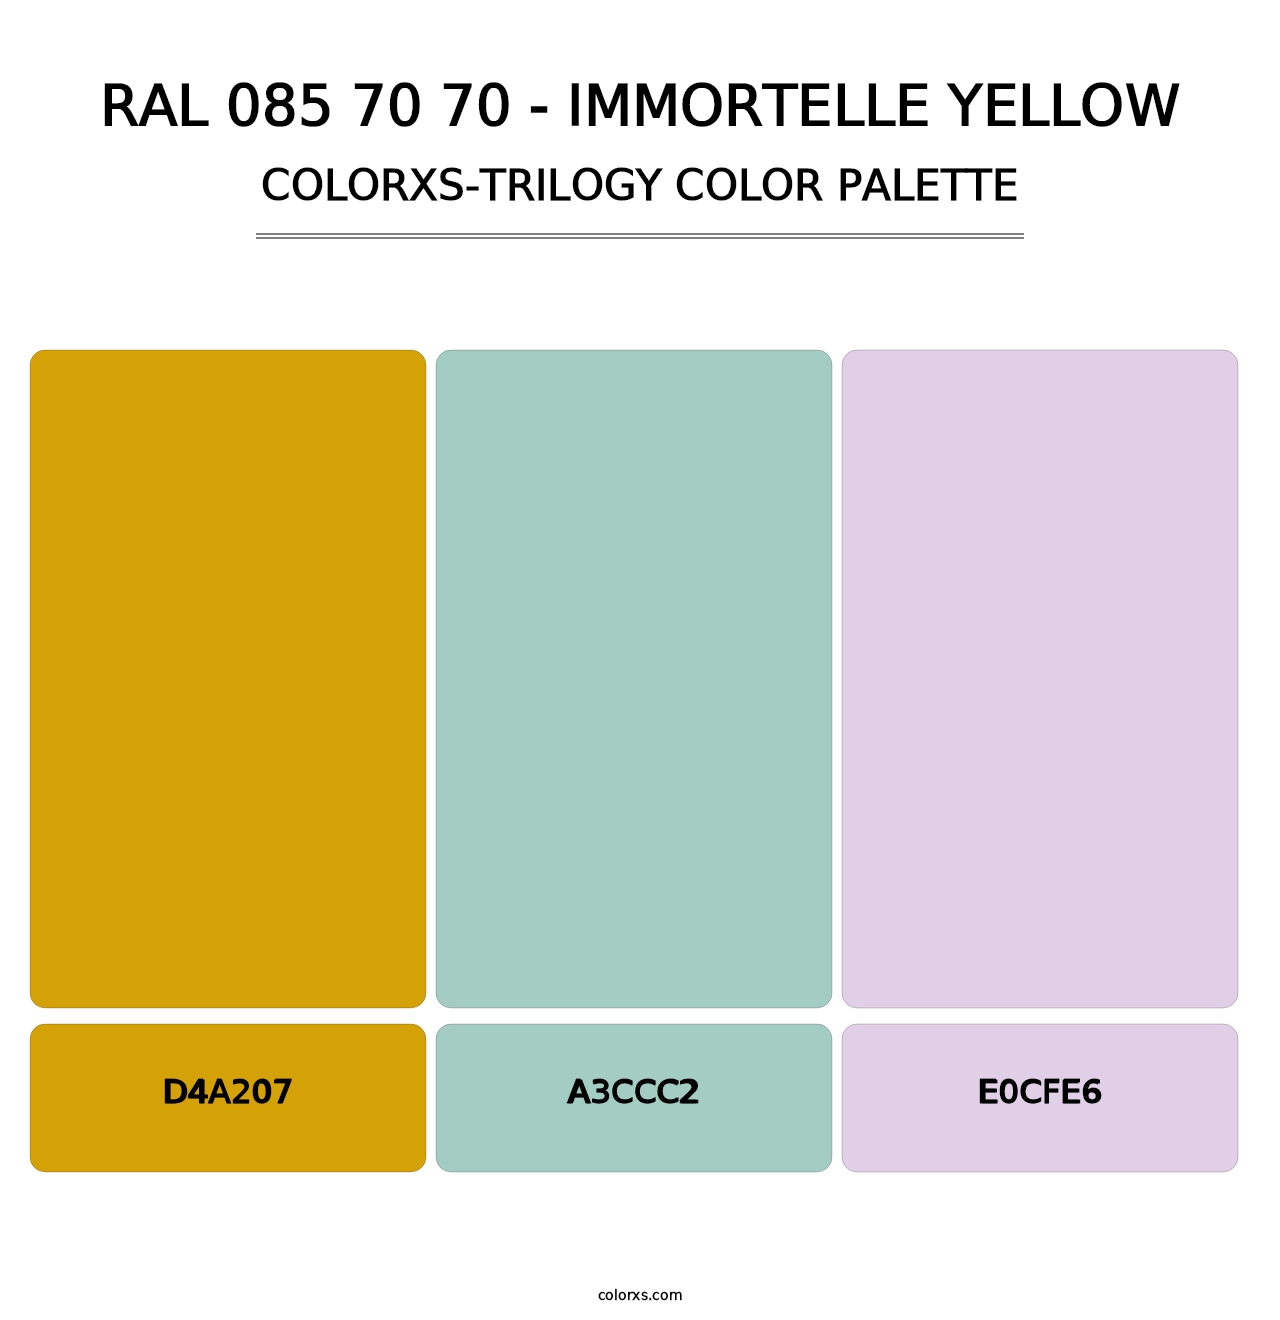 RAL 085 70 70 - Immortelle Yellow - Colorxs Trilogy Palette